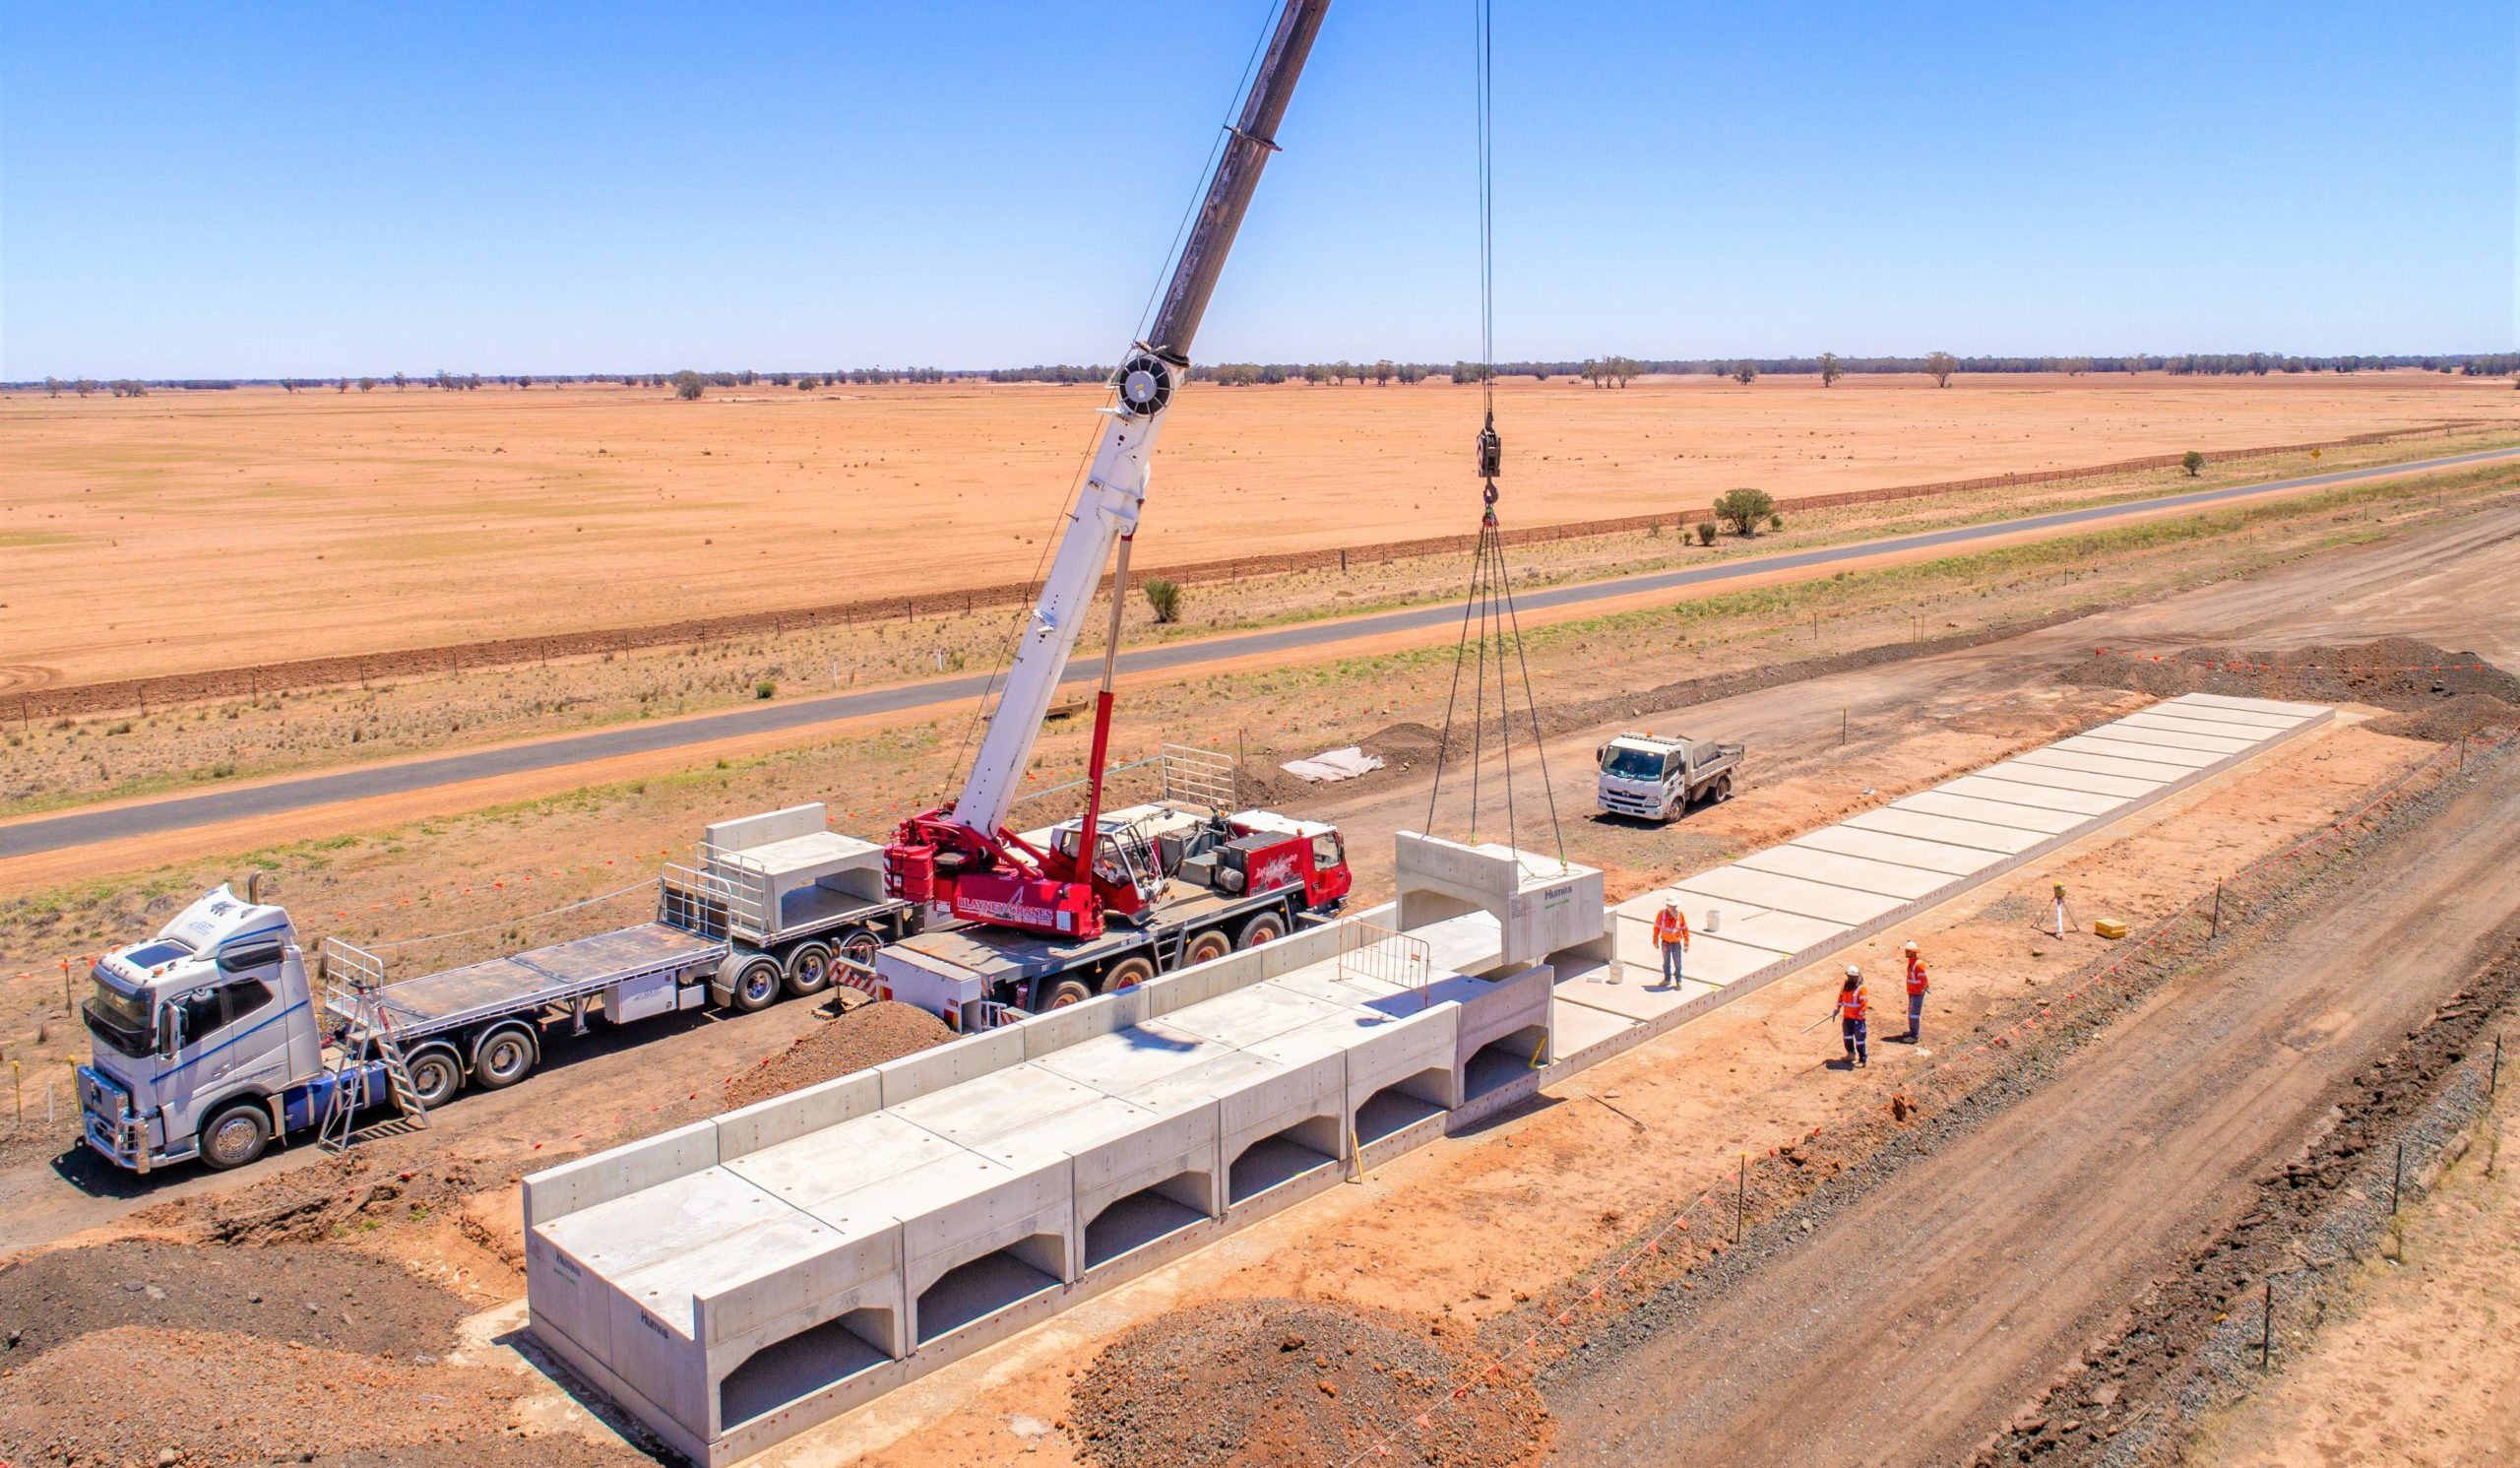 Concrete calverts are unloaded off a truck and installed by a crane, at a construction area on the Parkes to Narromine project